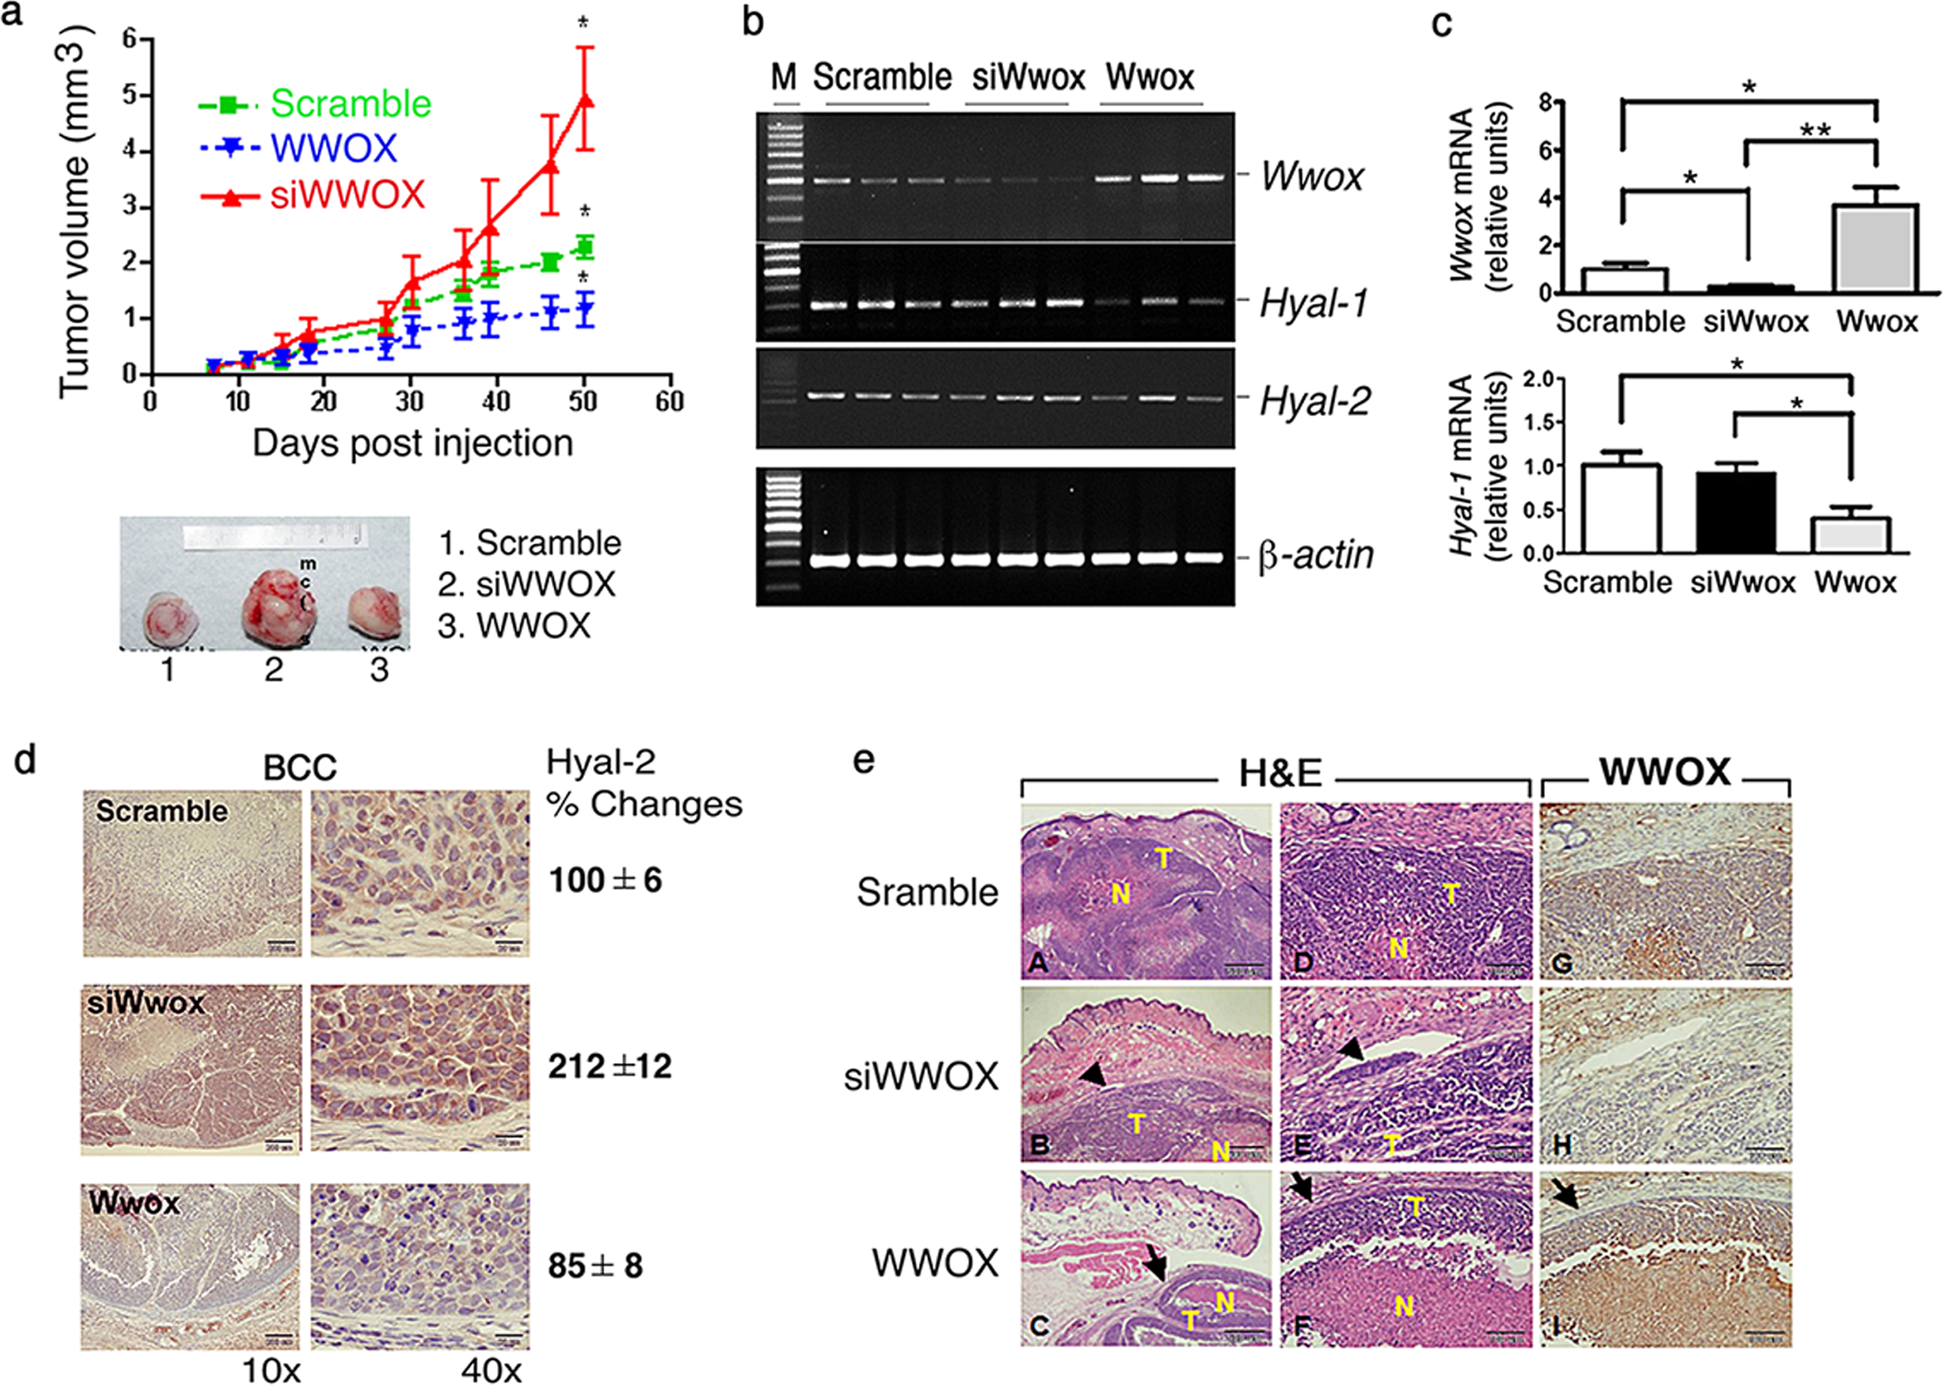 Strategies by which WWOX-deficient metastatic cancer cells utilize to  survive via dodging, compromising, and causing damage to WWOX-positive  normal microenvironment | Cell Death Discovery